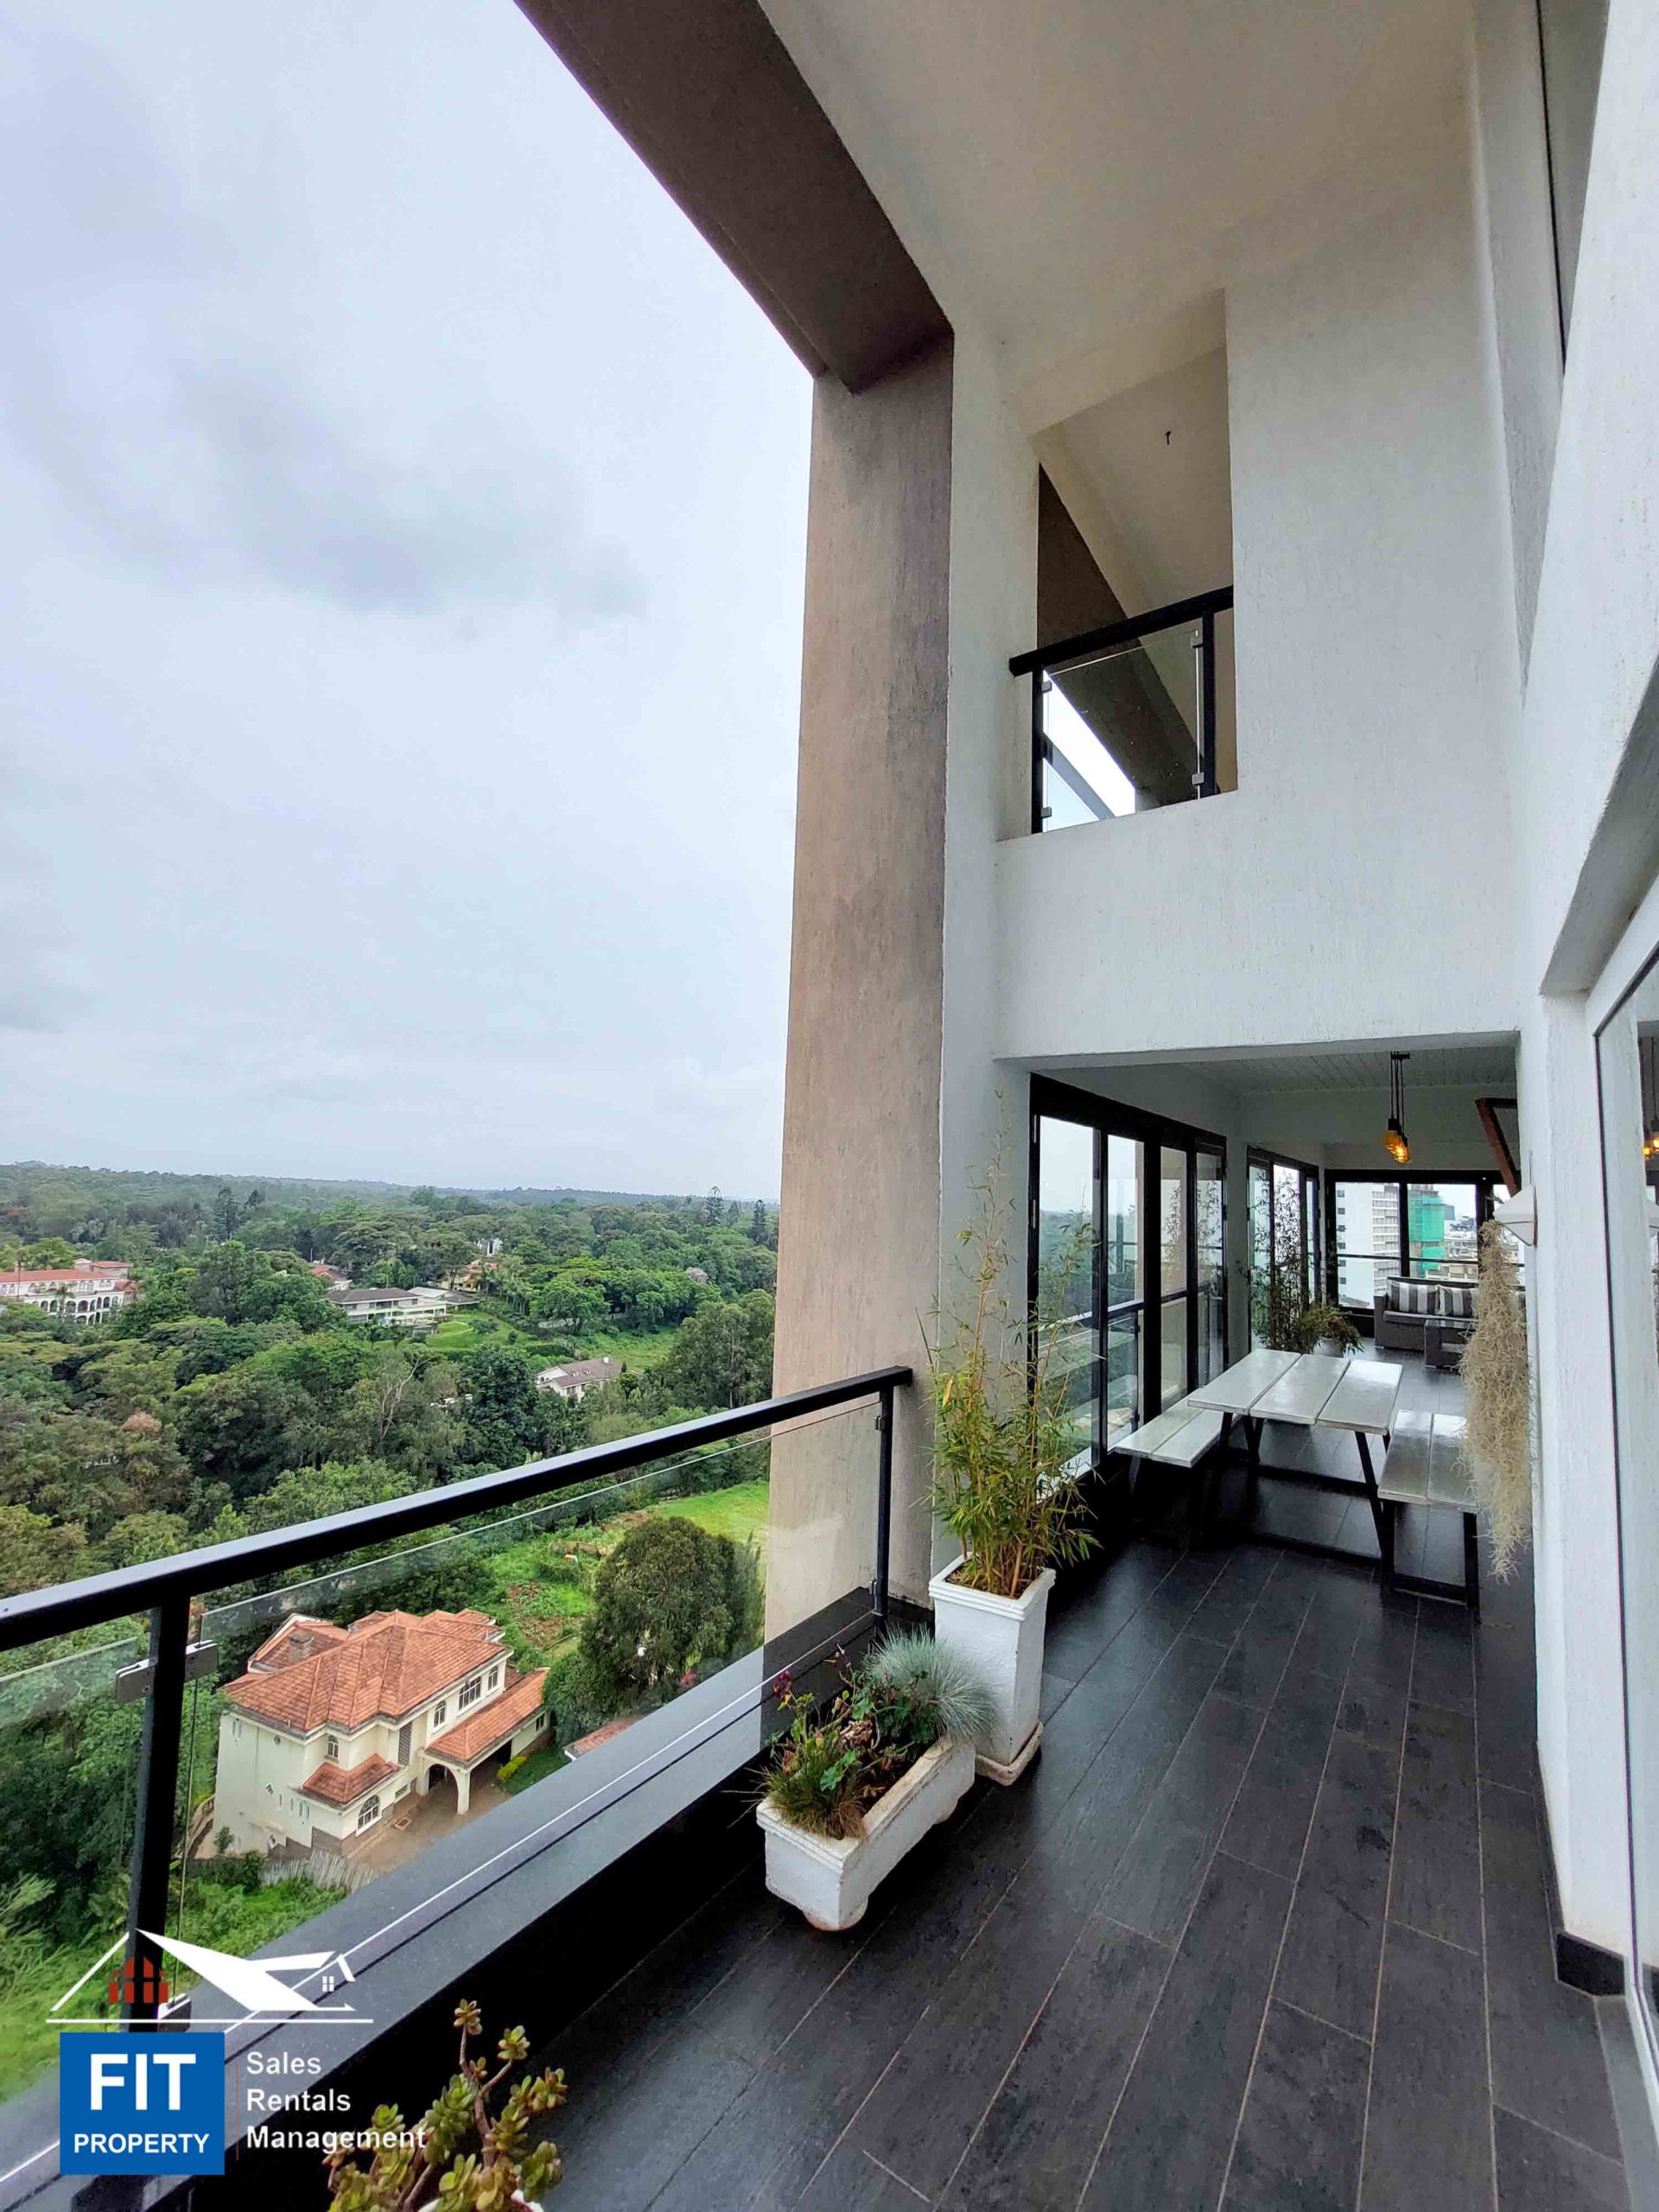 Stunning 4 BedForest Facing Duplex Penthouse, Parklands. Overlooking the vast Karura Forest. Priced at KES 50M FIT Property